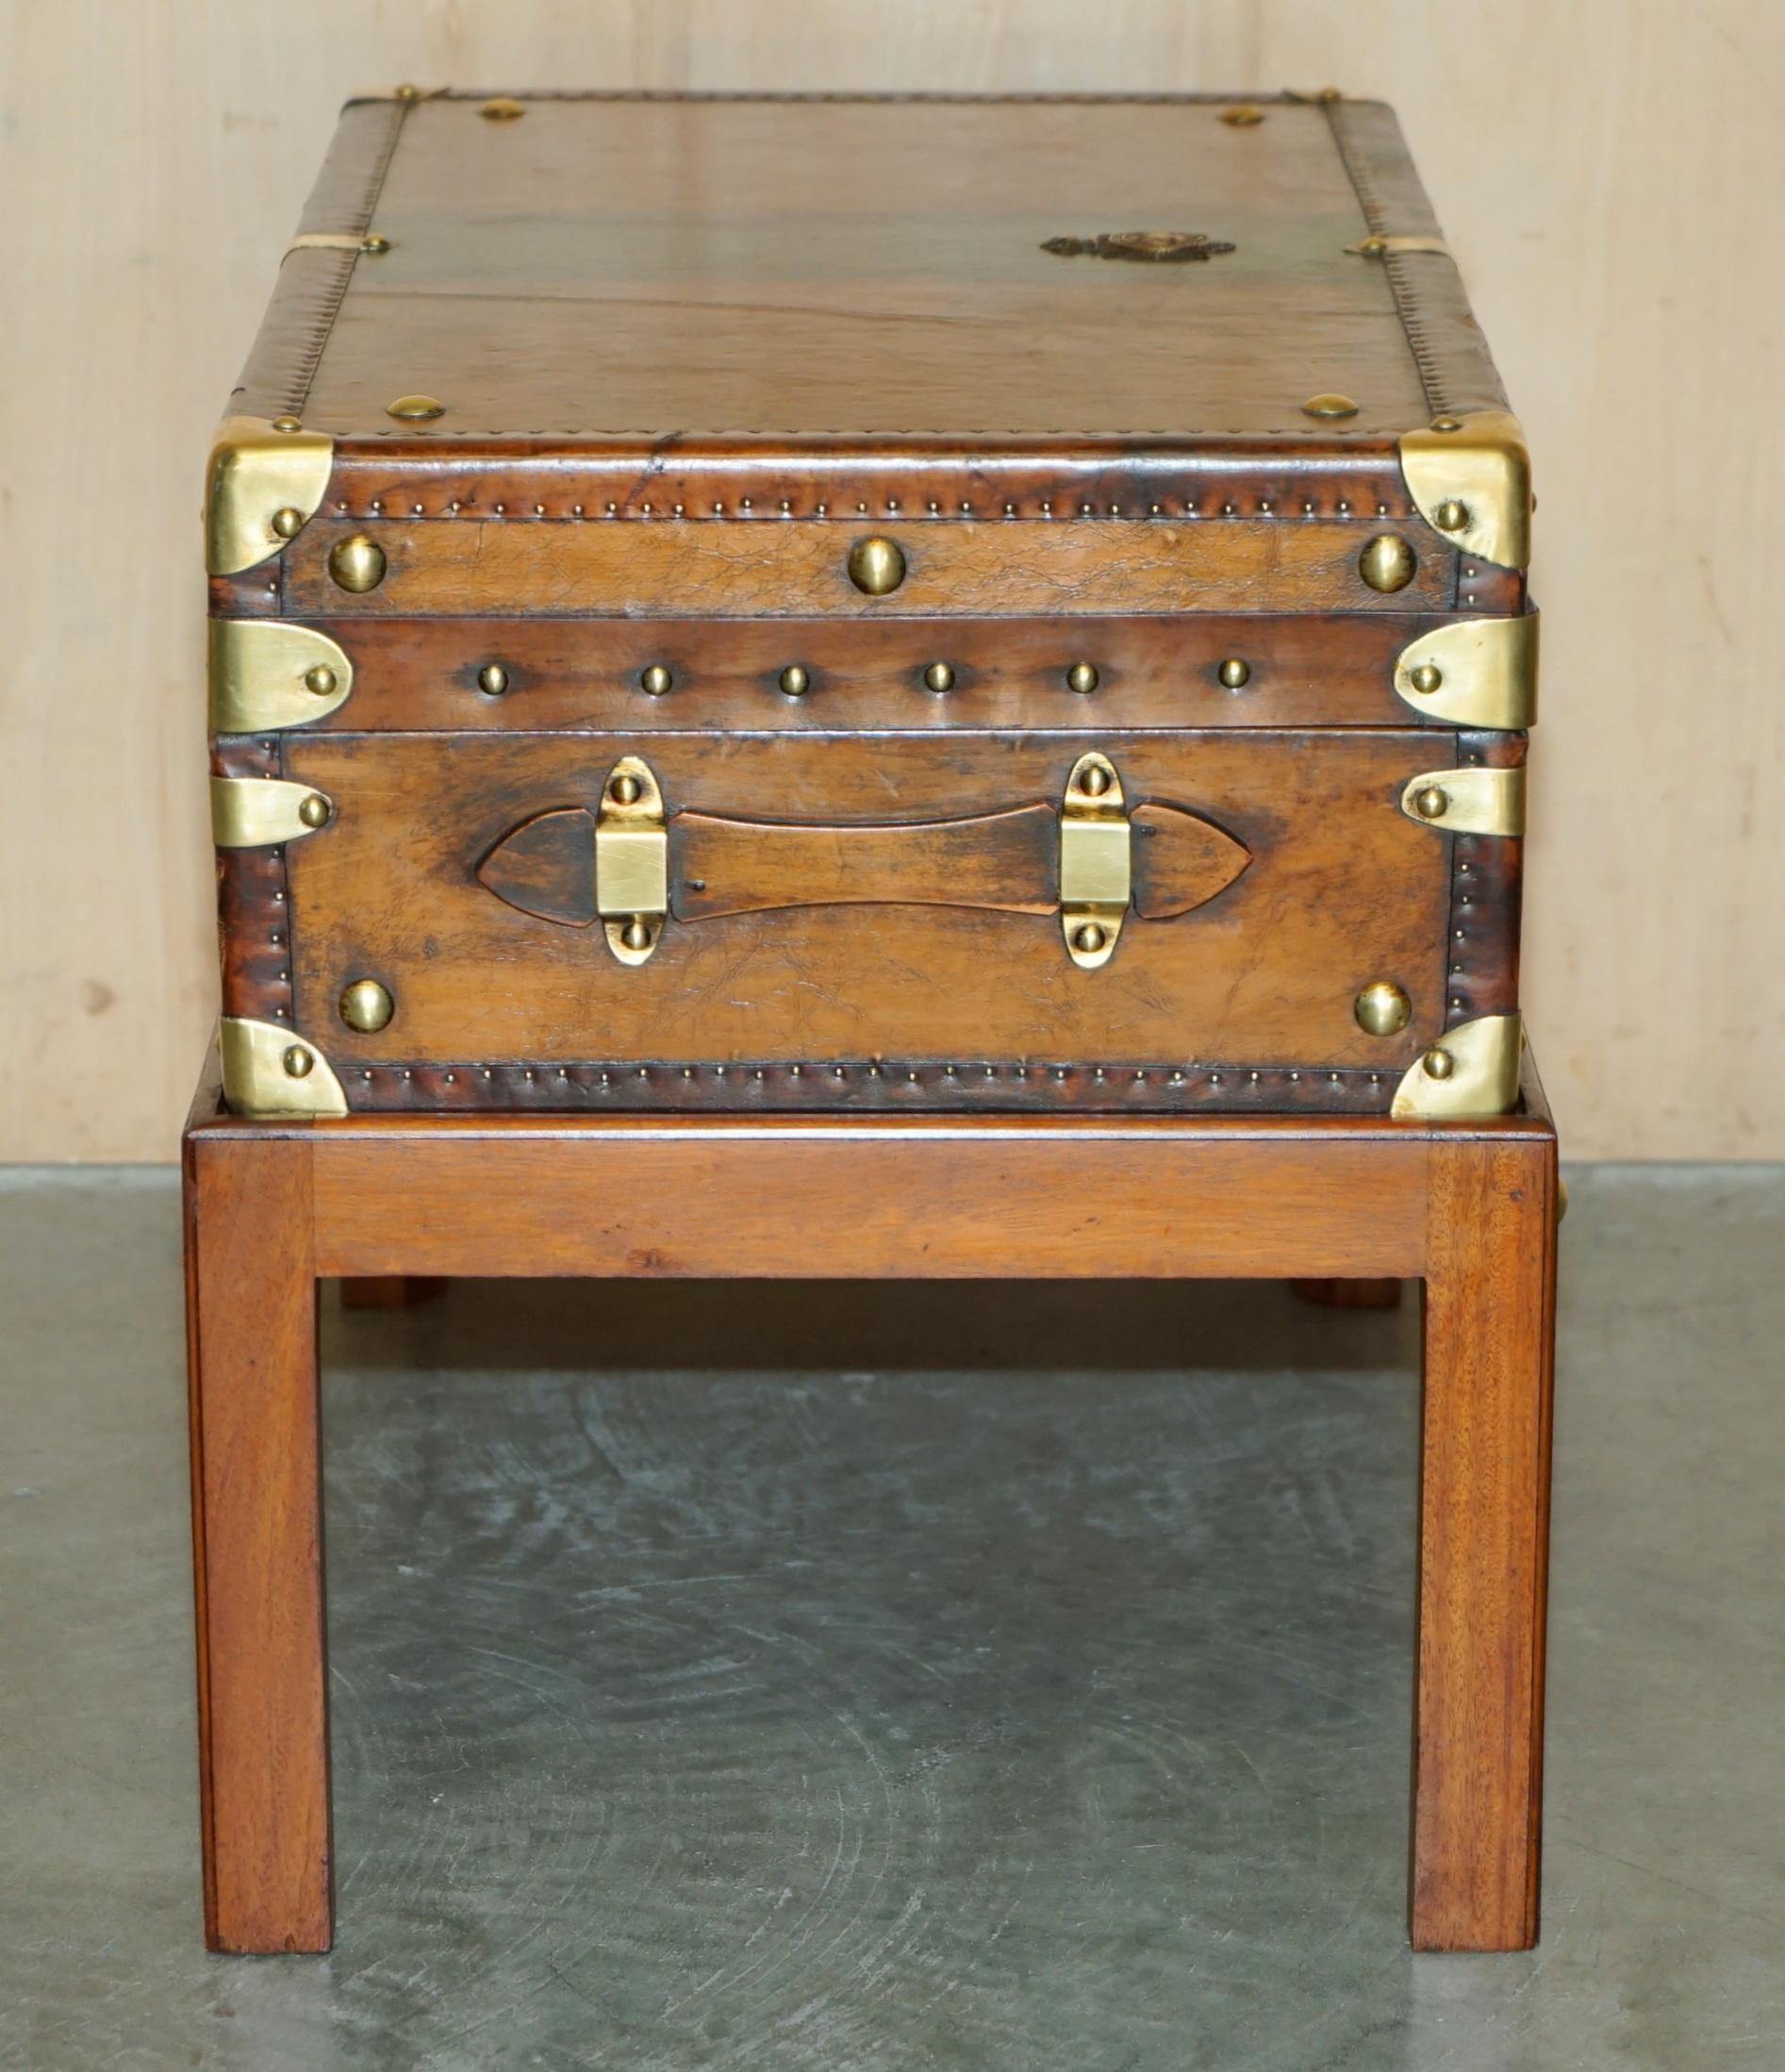 Royal House Antiques

Royal House Antiques is delighted to offer for sale this extremely important, museum quality, fully restored brown leather trunk with custom made hardwood stand and various Royal Army badges

Please note the delivery fee listed